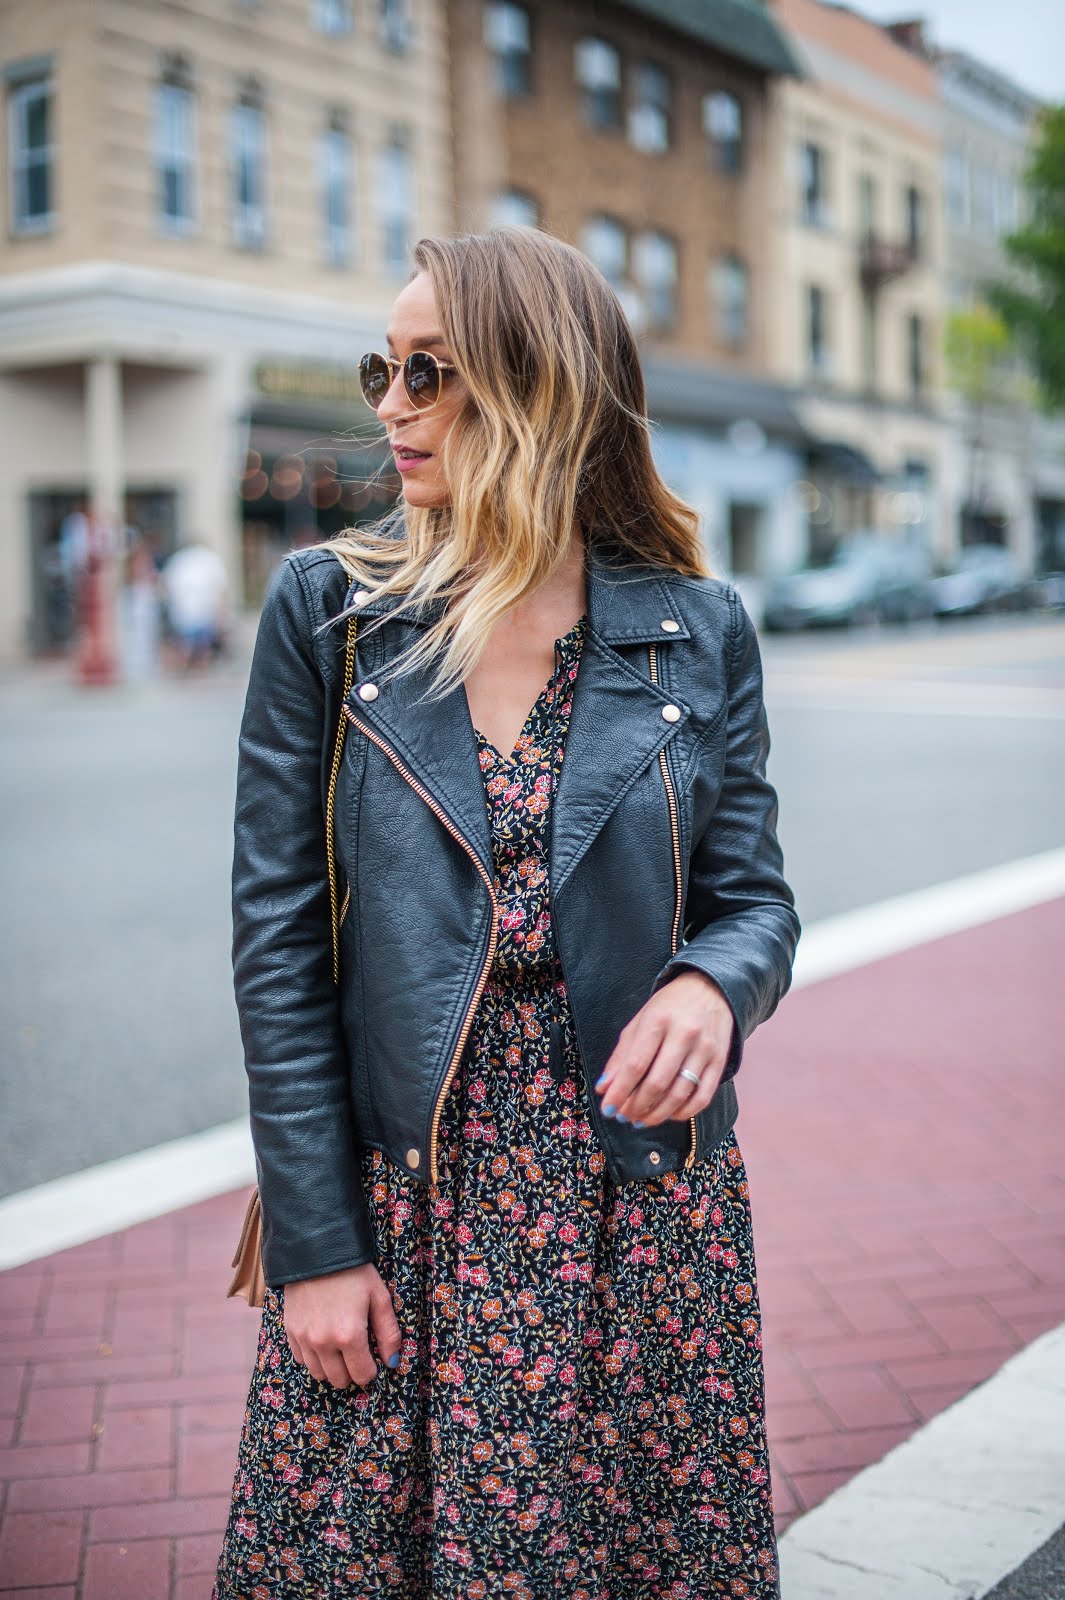 Her Name Is Sylvia: Dark Florals & Leather